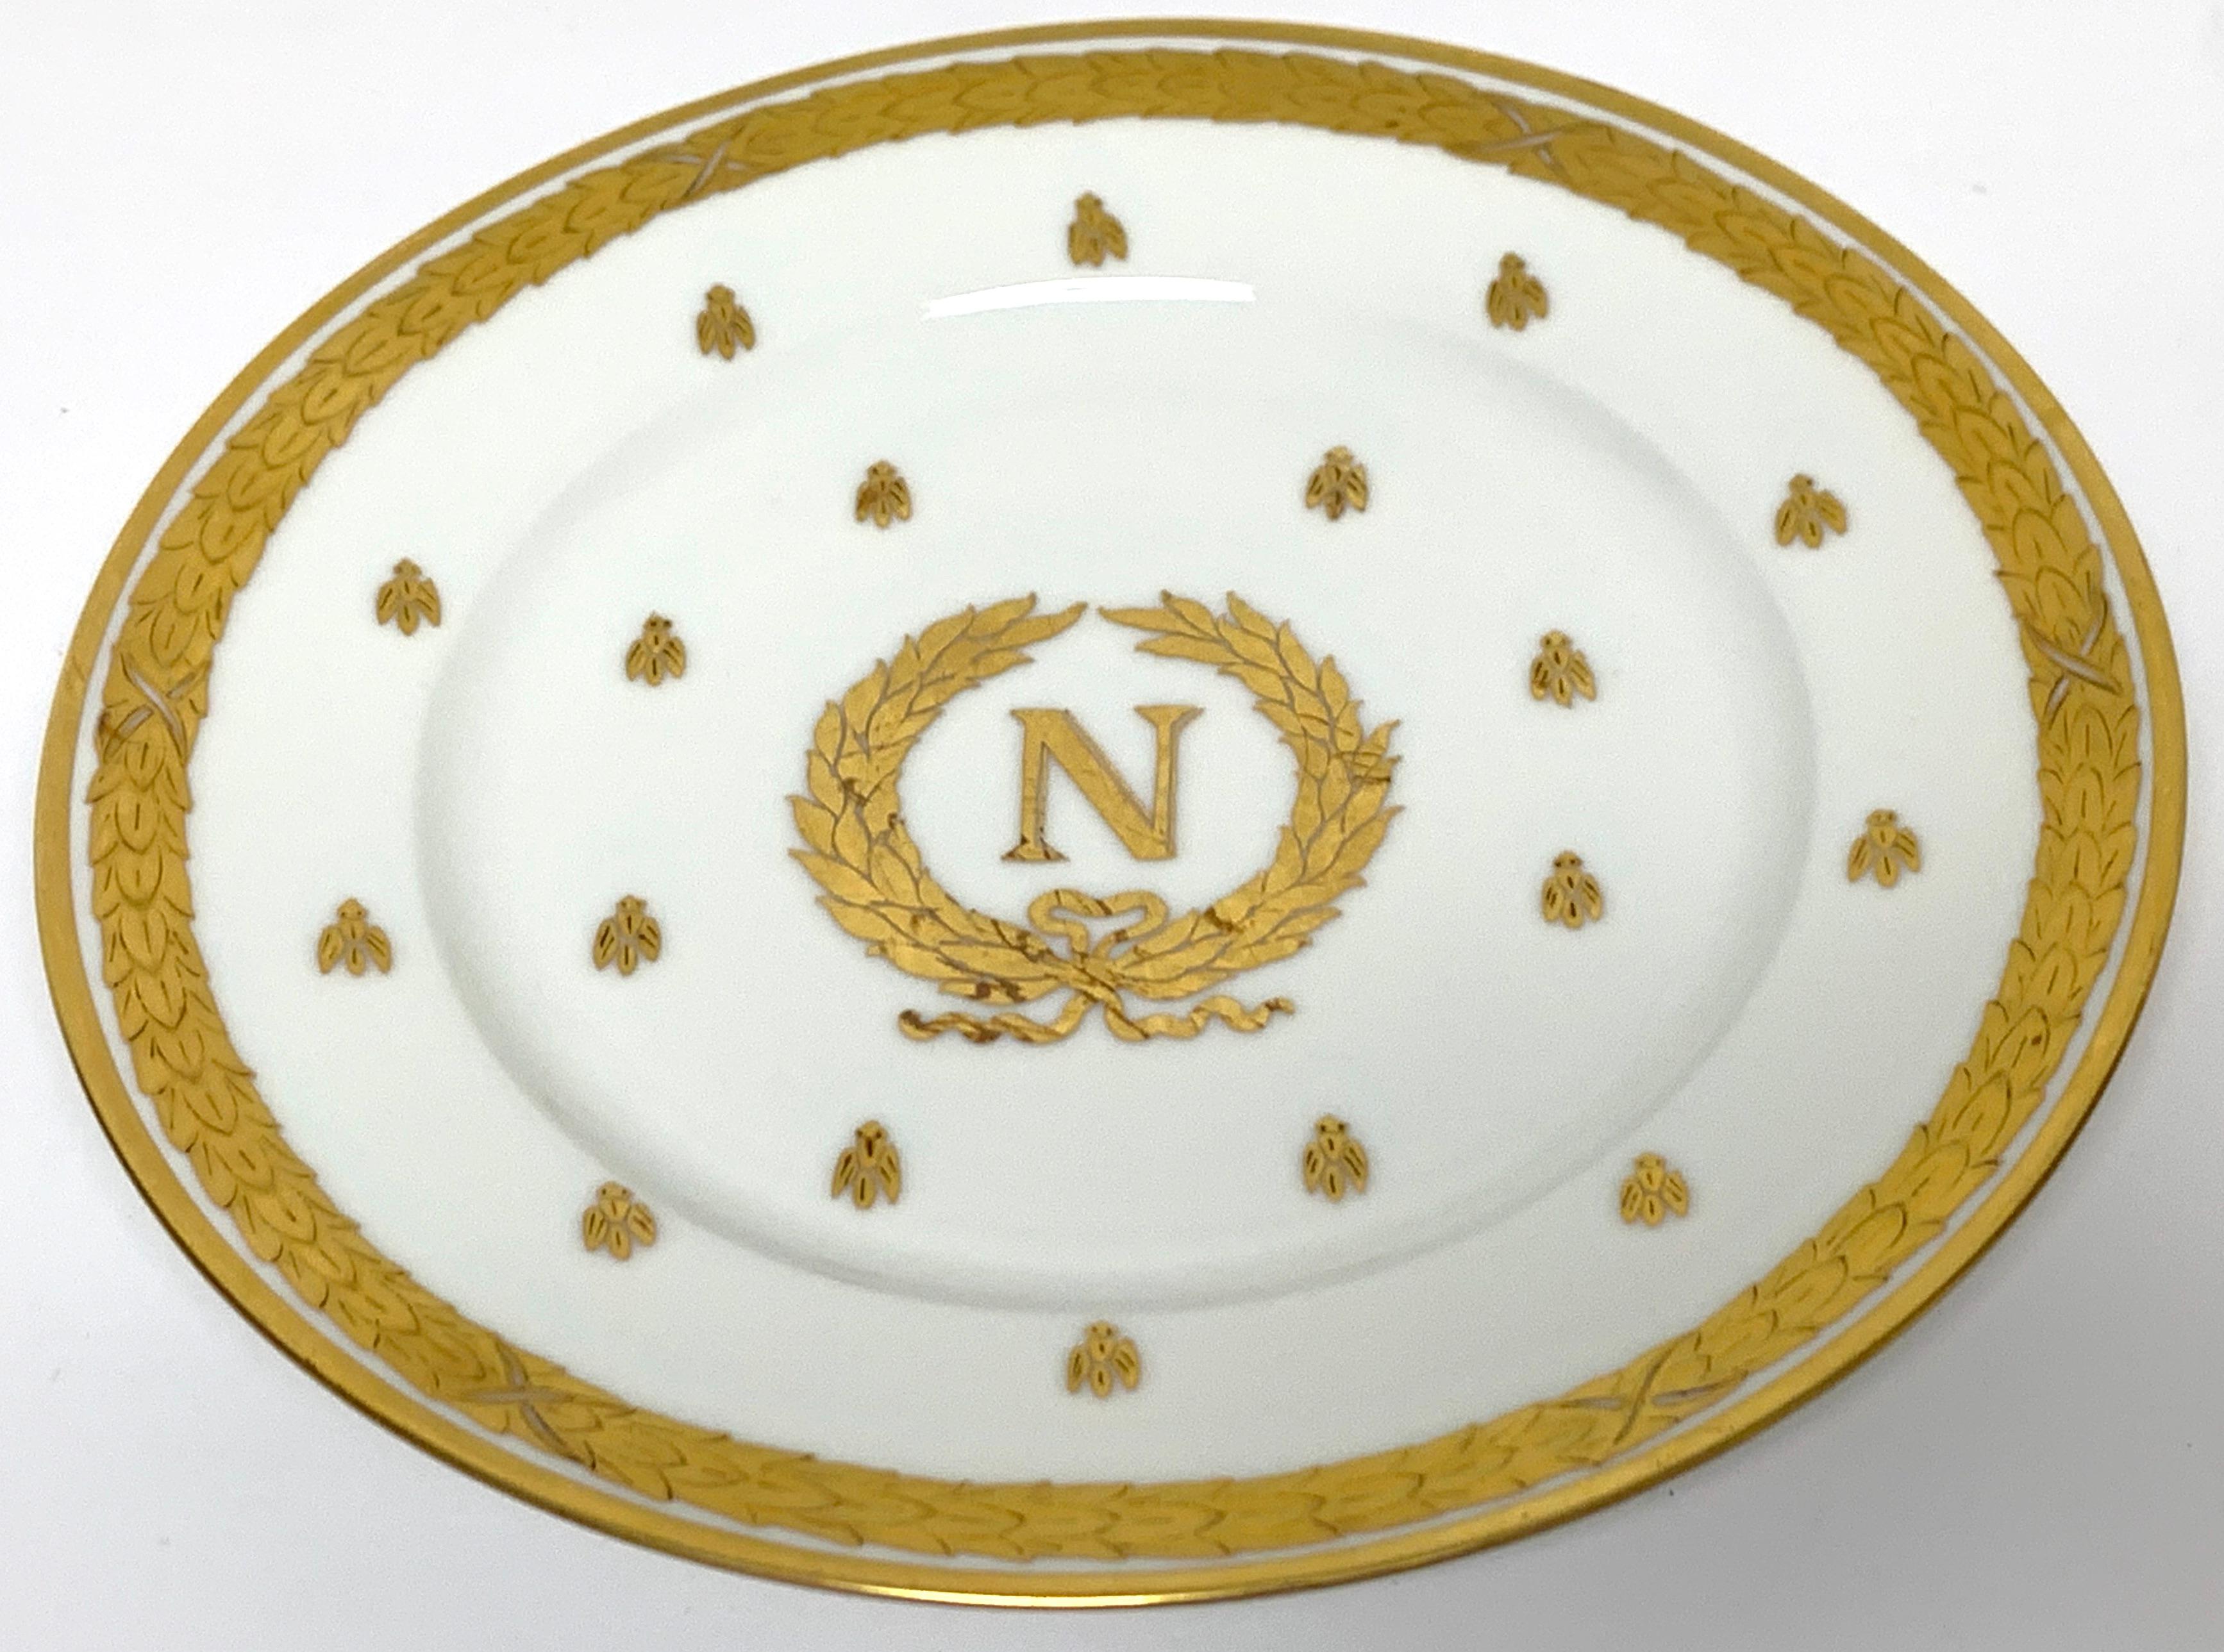 12 Limoges Raised Gilt Enameled Napoleonic Plates, circa 1900 In Good Condition For Sale In West Palm Beach, FL